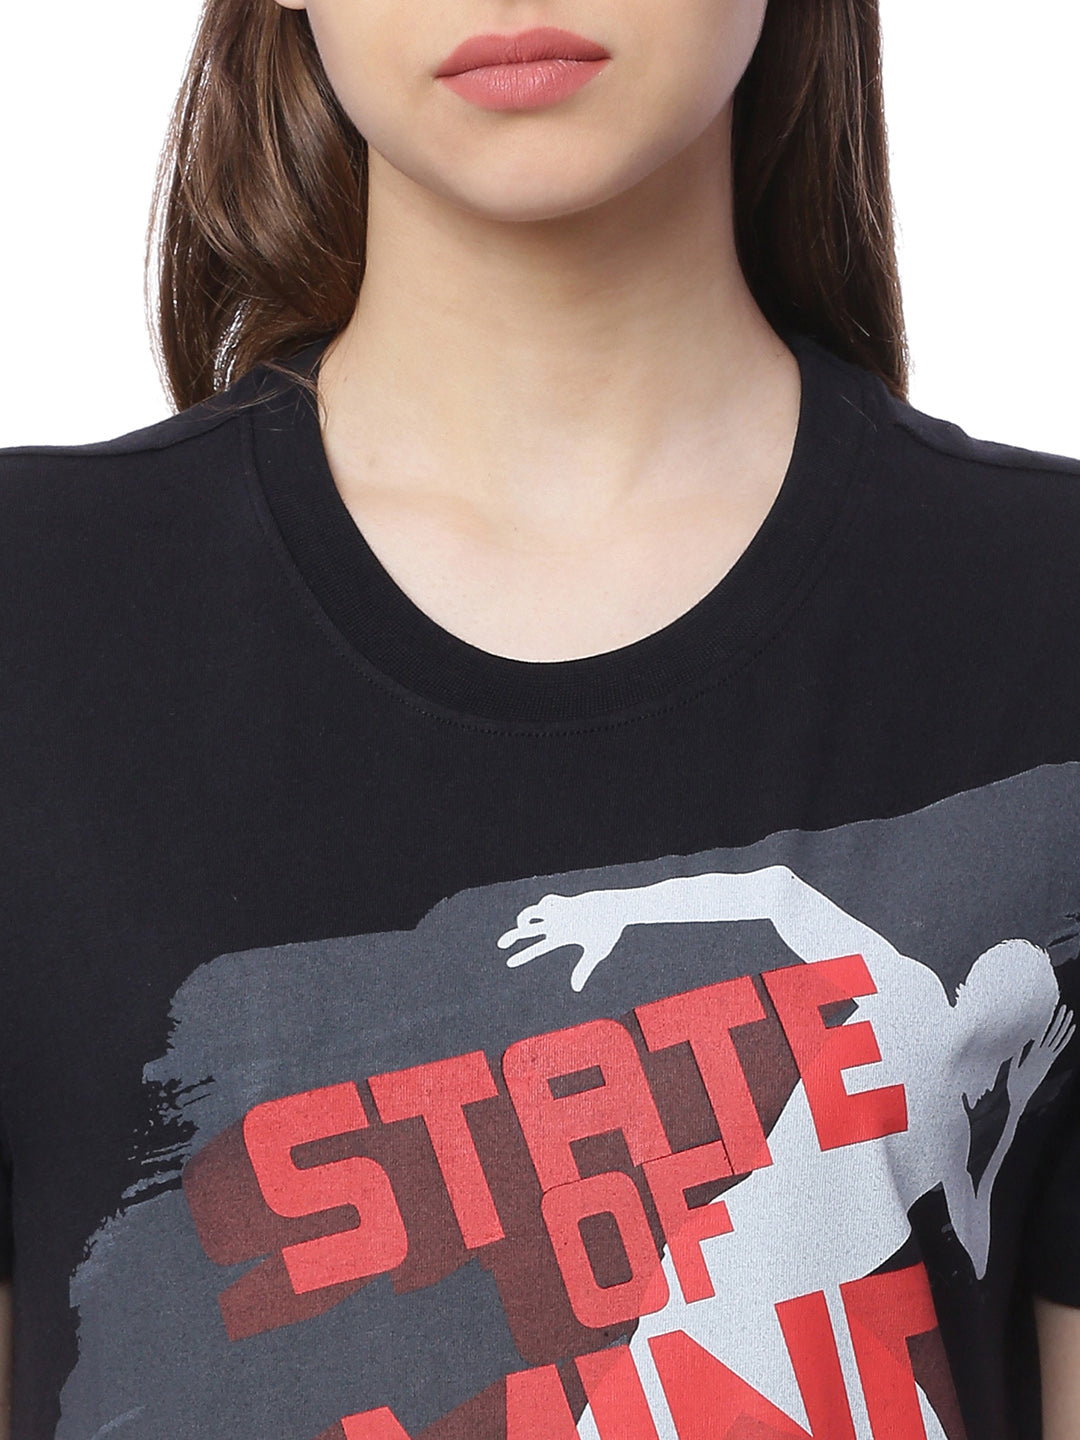 Wolfpack State Of Mind Black Printed Women T-Shirt